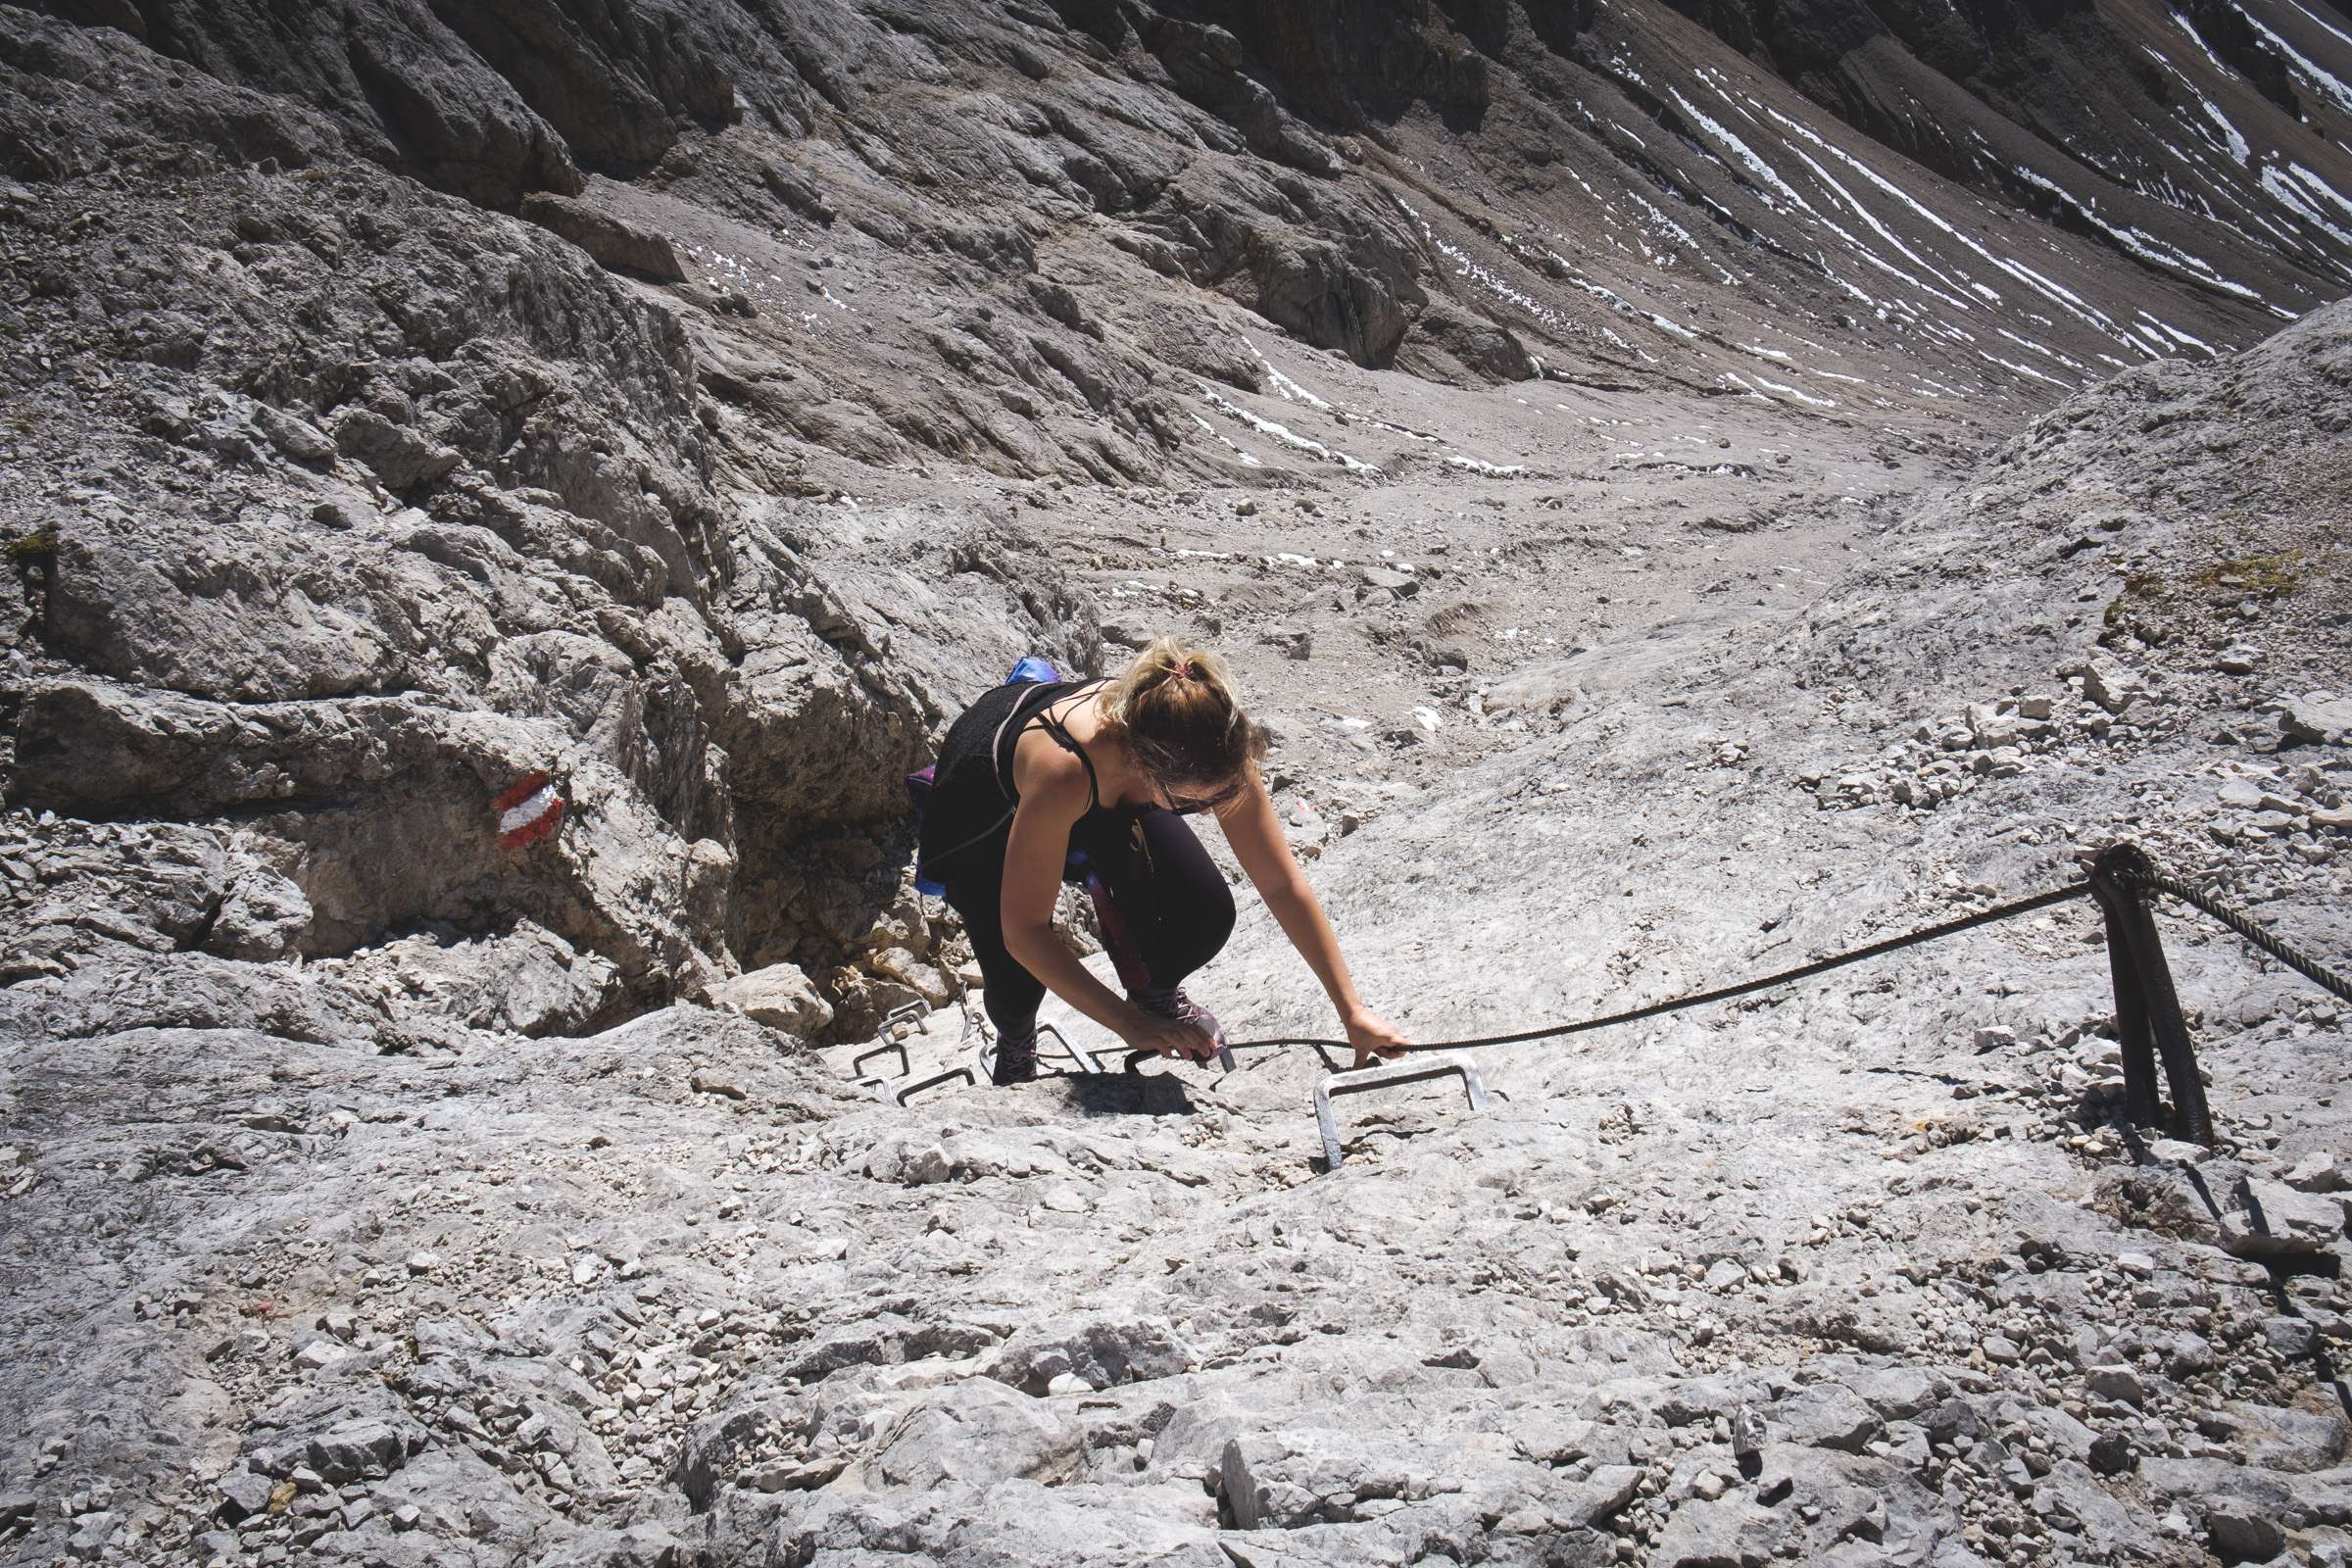 Caroline climbing on pegs with cables on Dachstein